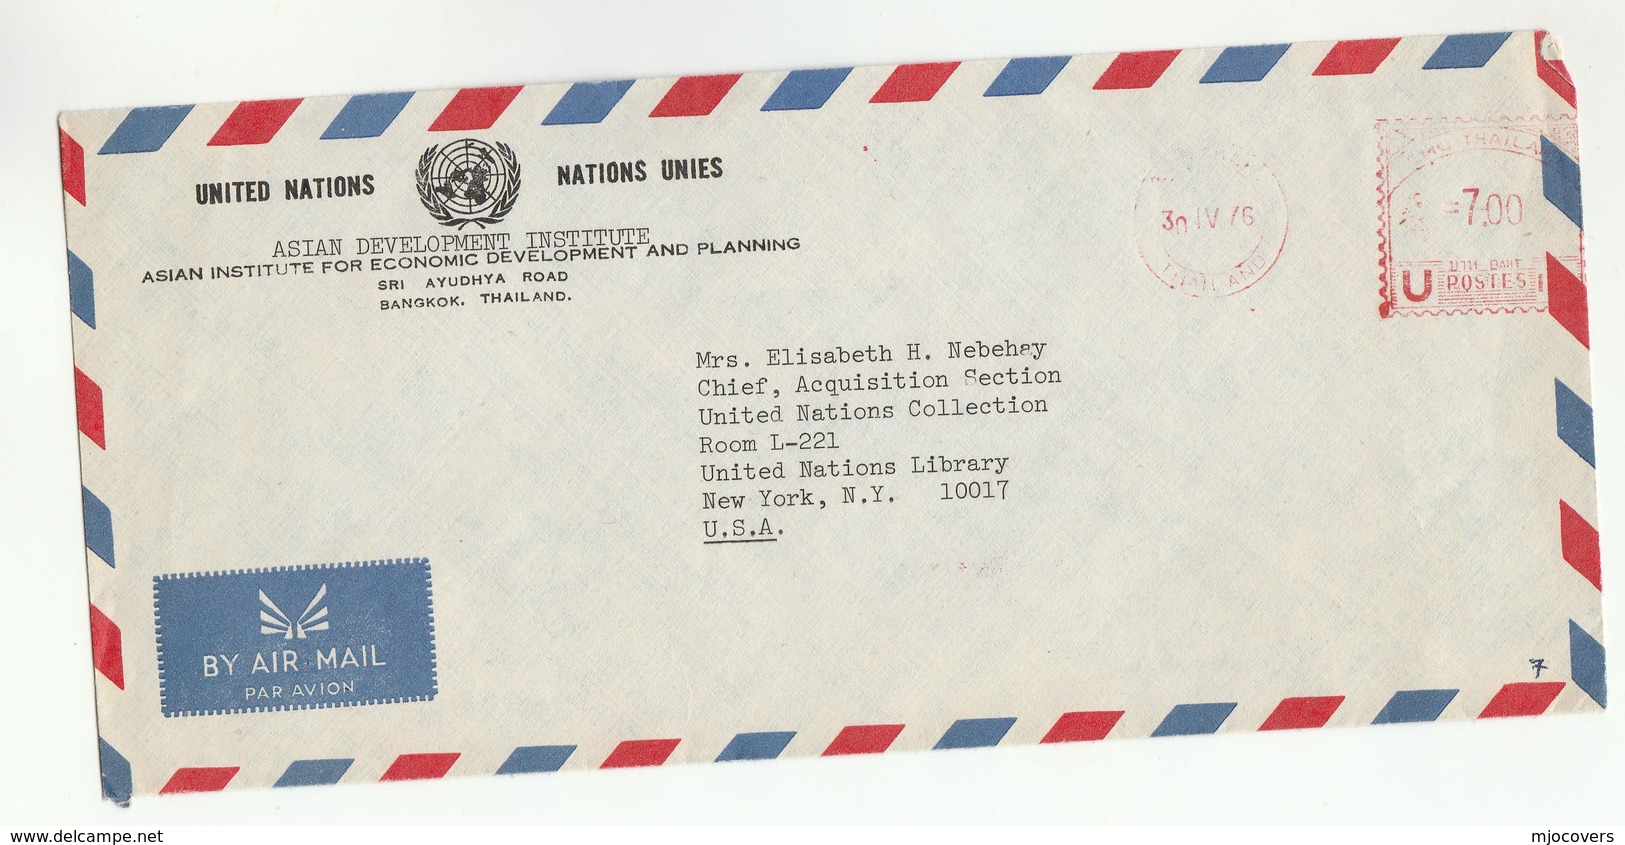 1976 UN In THAILAND Airmail COVER METER Stamps UN DEVELOPMENT INST PLANNING  To United Nations NY USA - Thailand